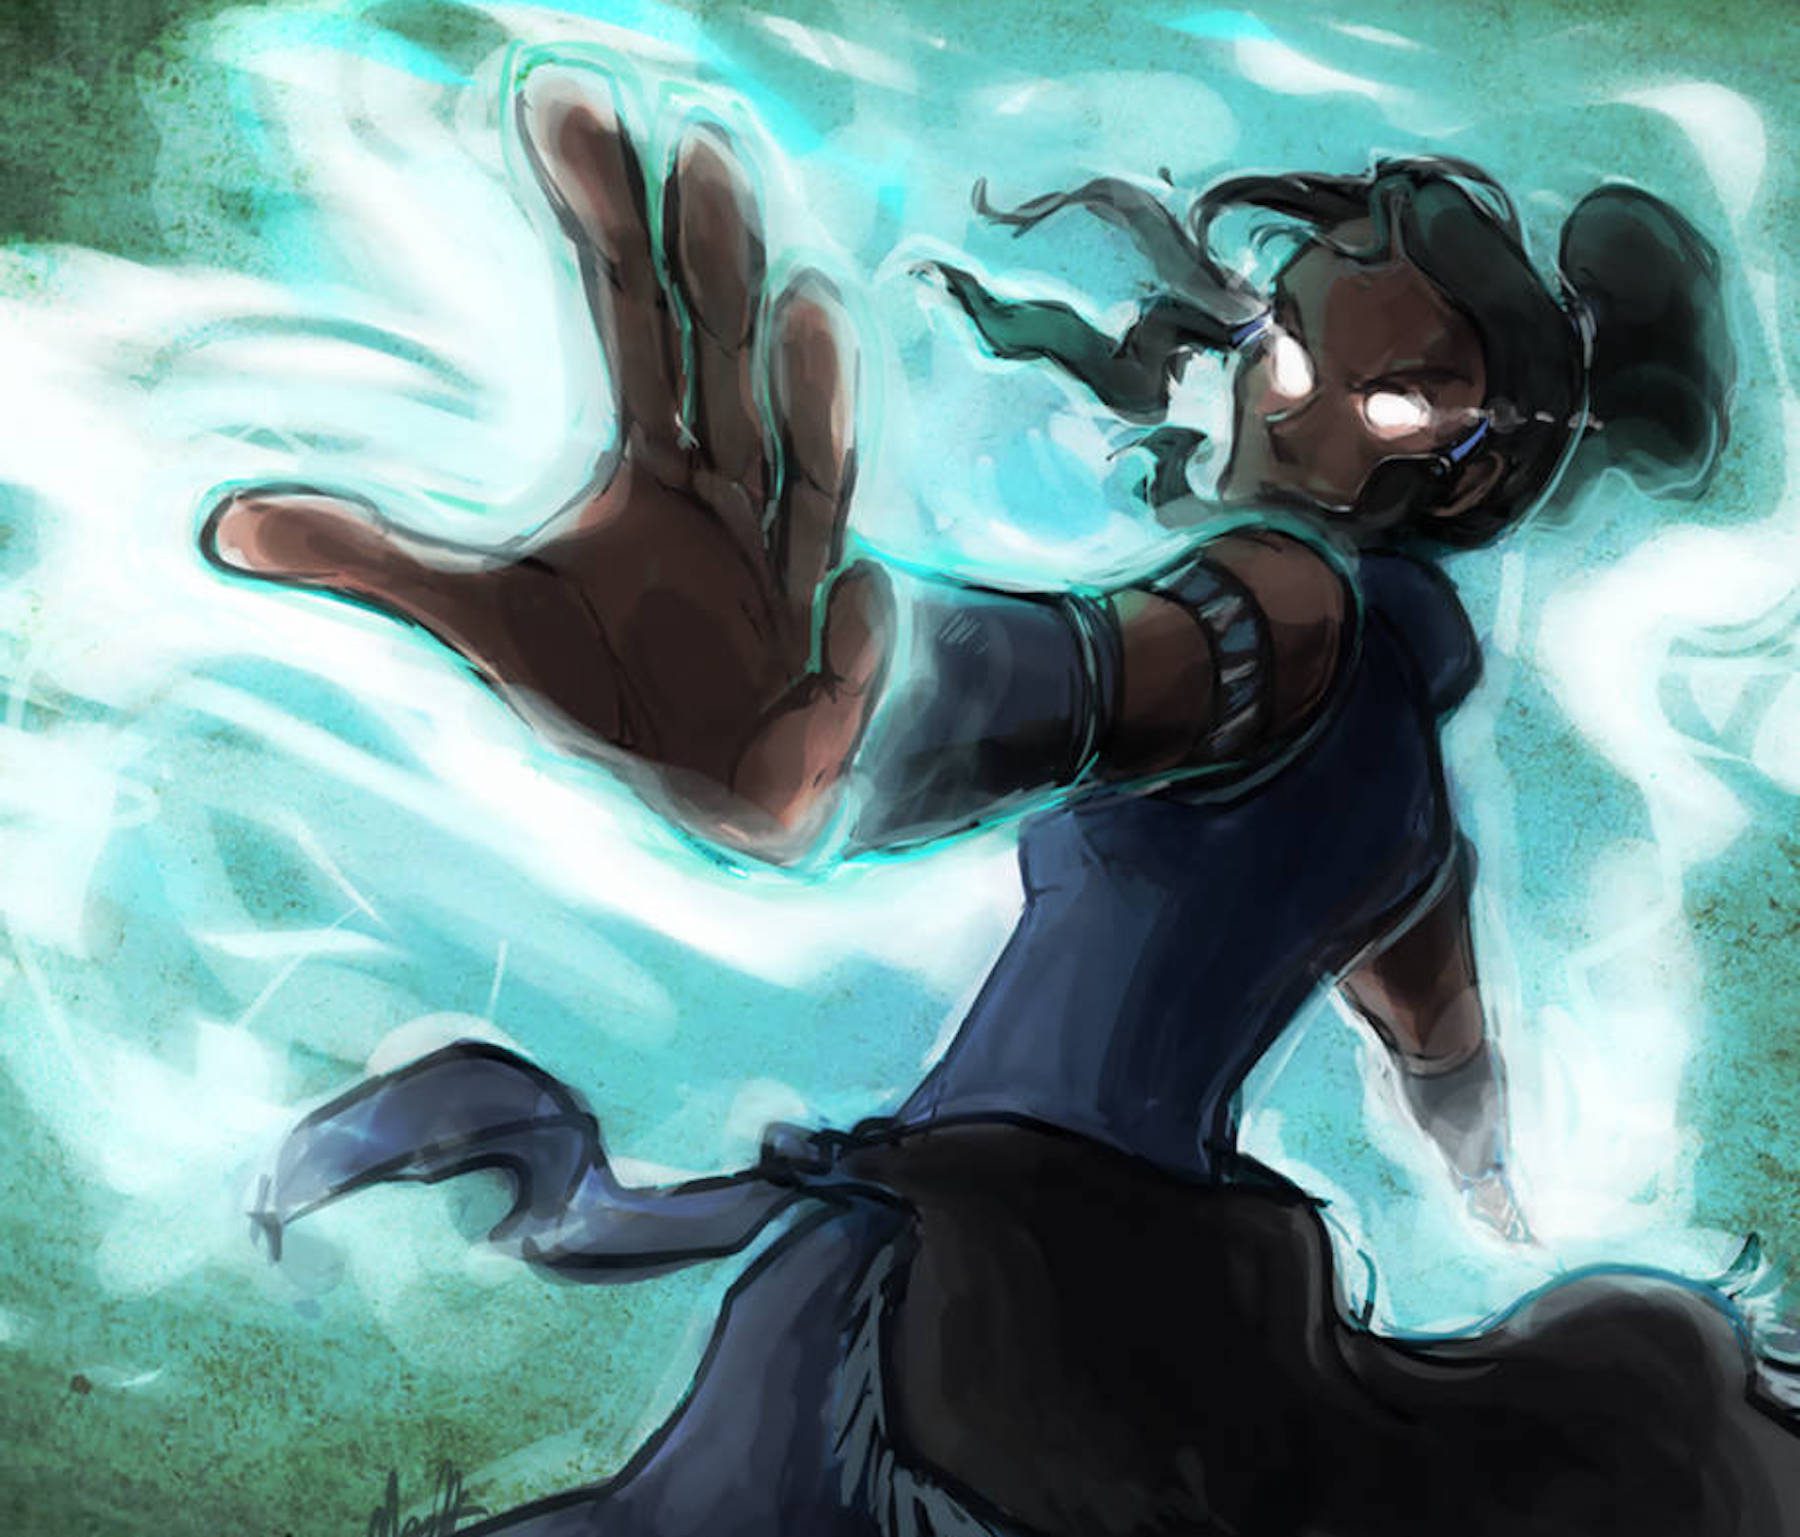 Energybending from Avatar The Last Airbender franchise. Character with illuminated eyes wielding power while blue energy waves encircle them.